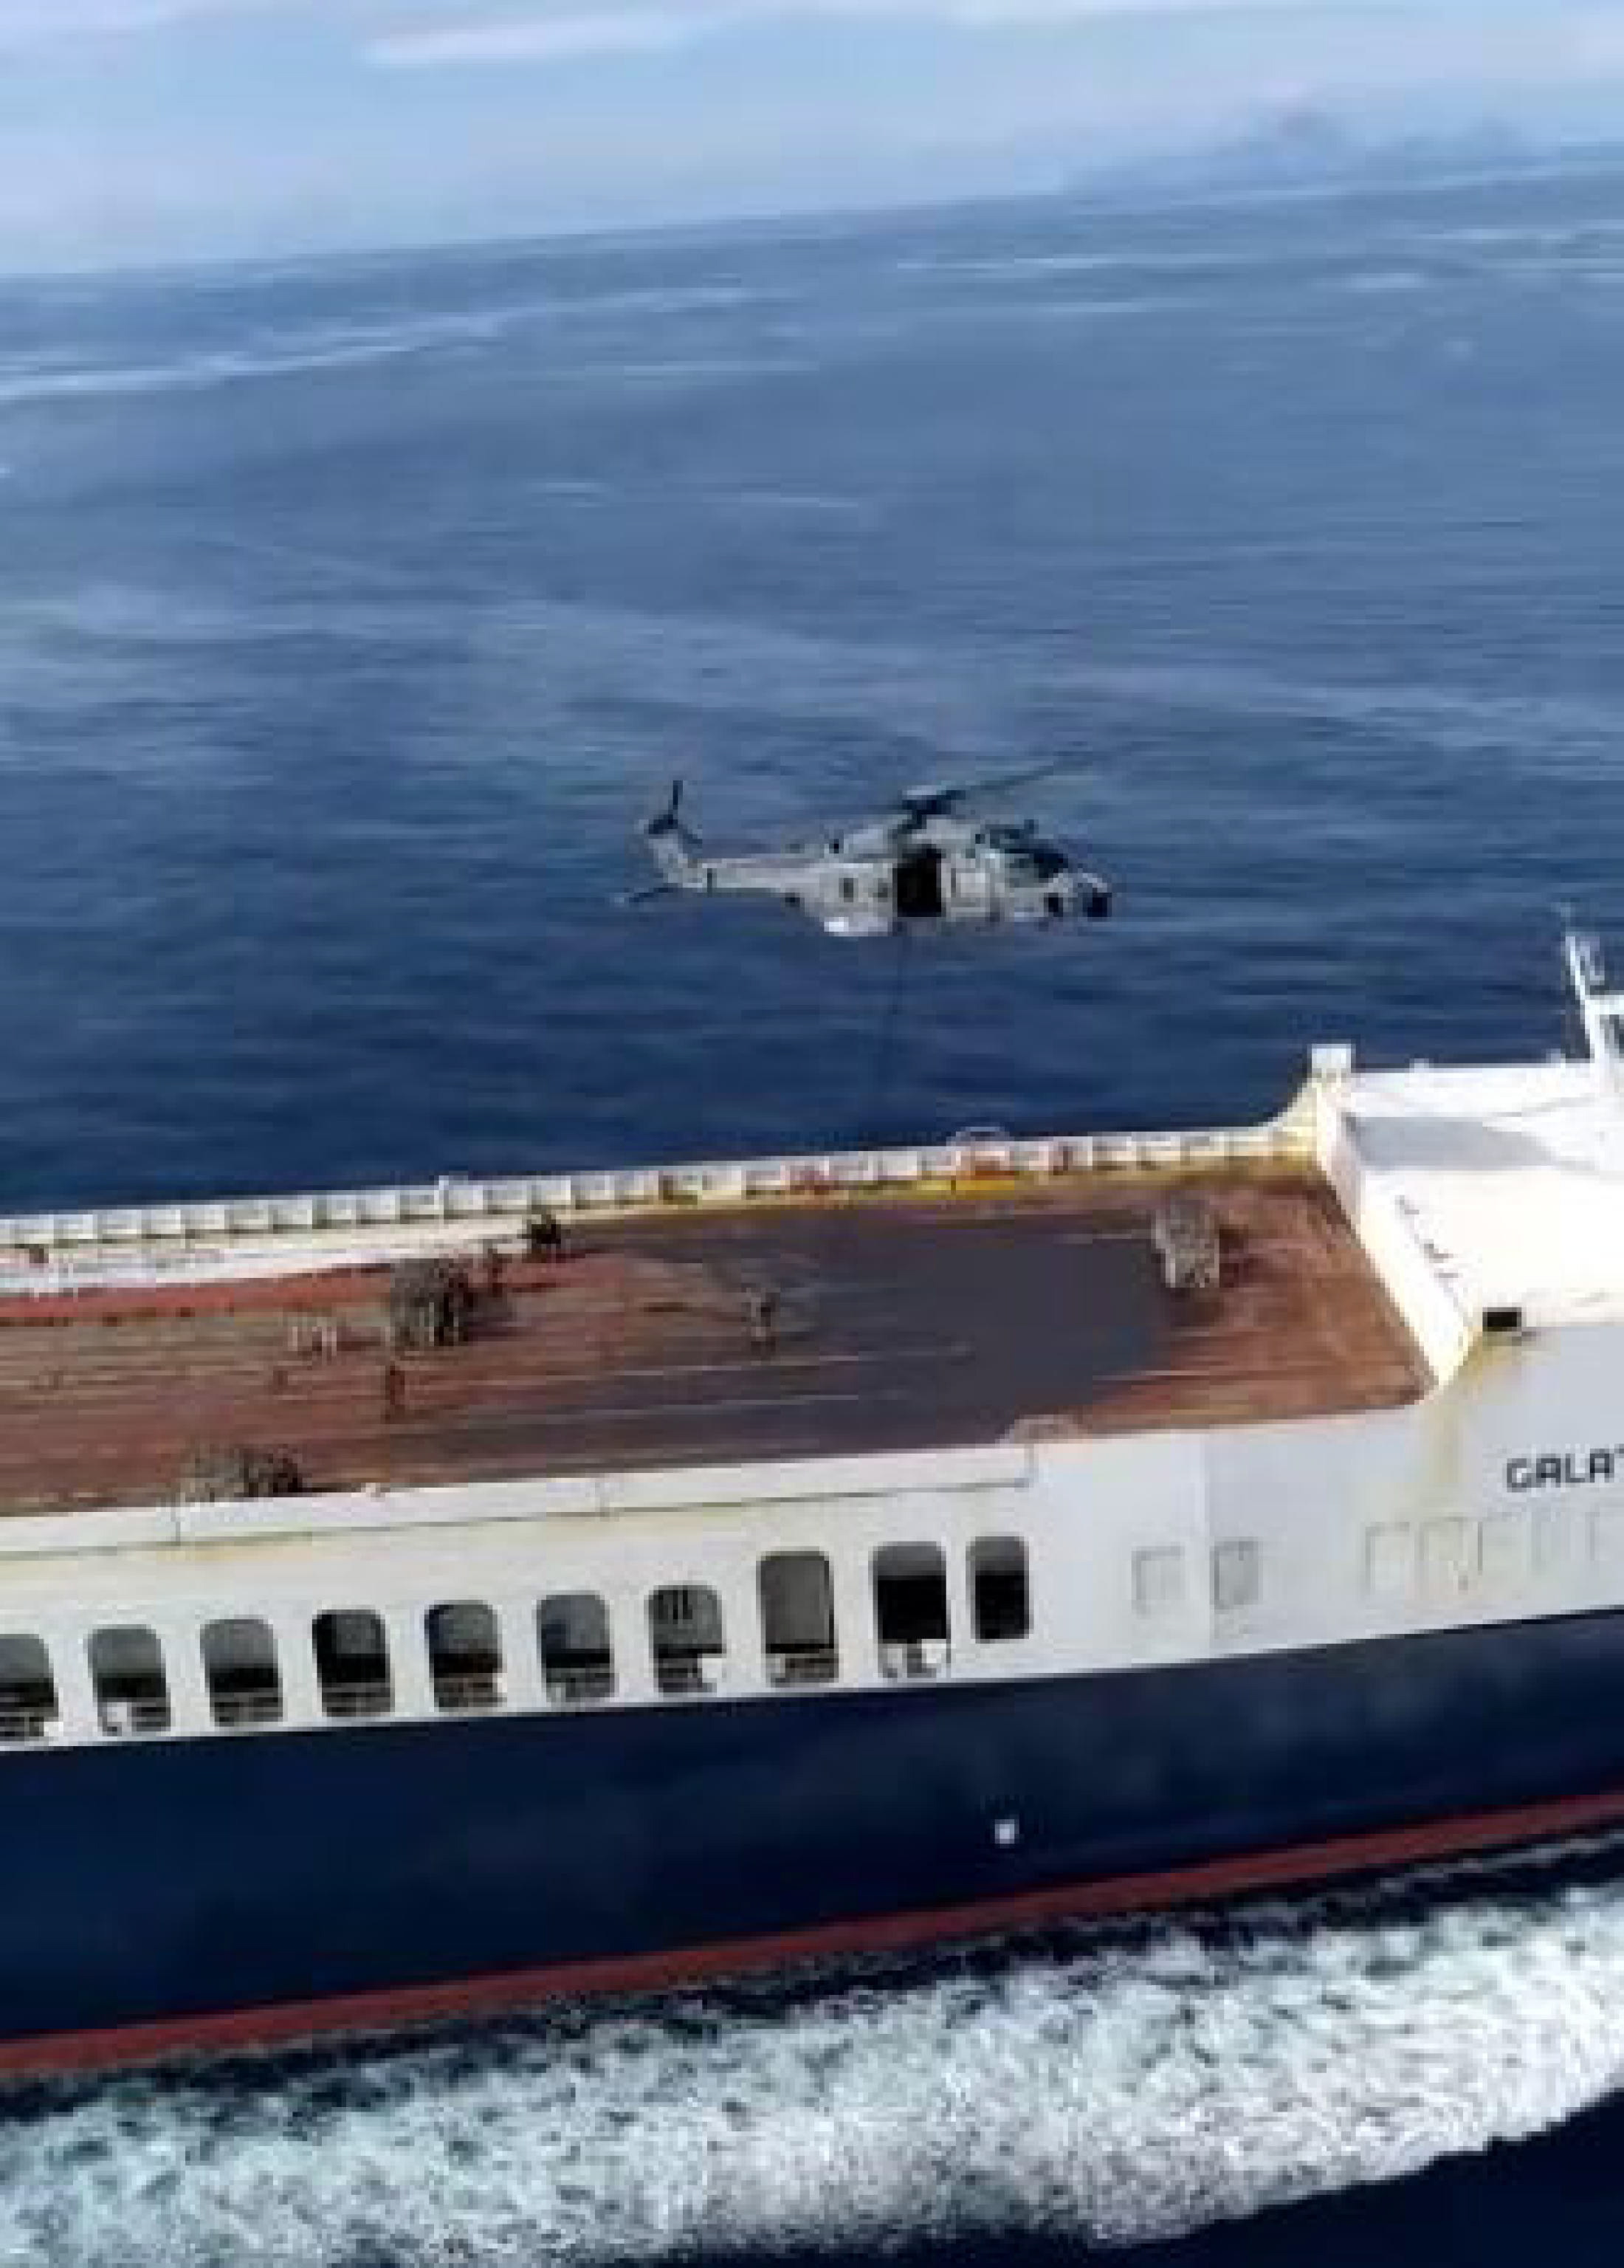 italy-special-forces-board-turkish-vessel-after-alert-over-unidentified-passengers1